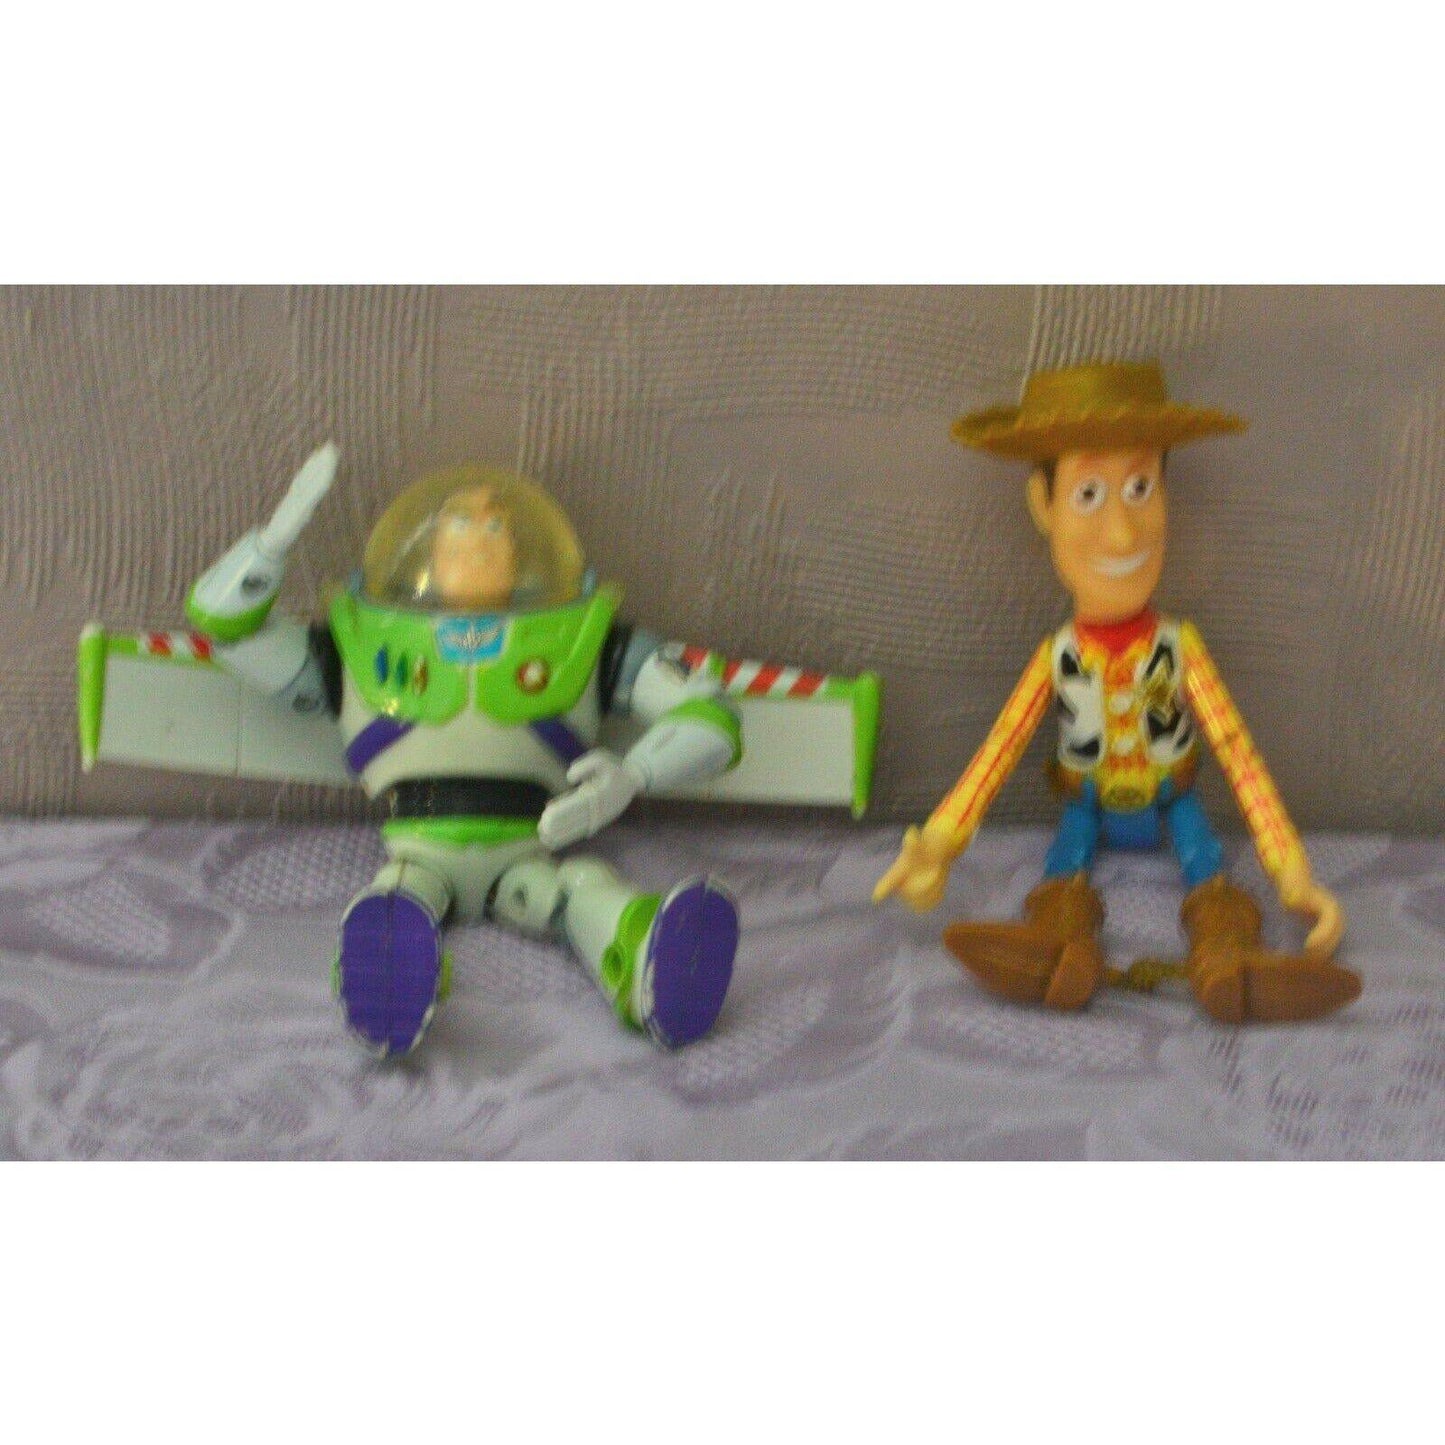 1990's Toy Story Toys Good Condition | Toy Story-TMD167207